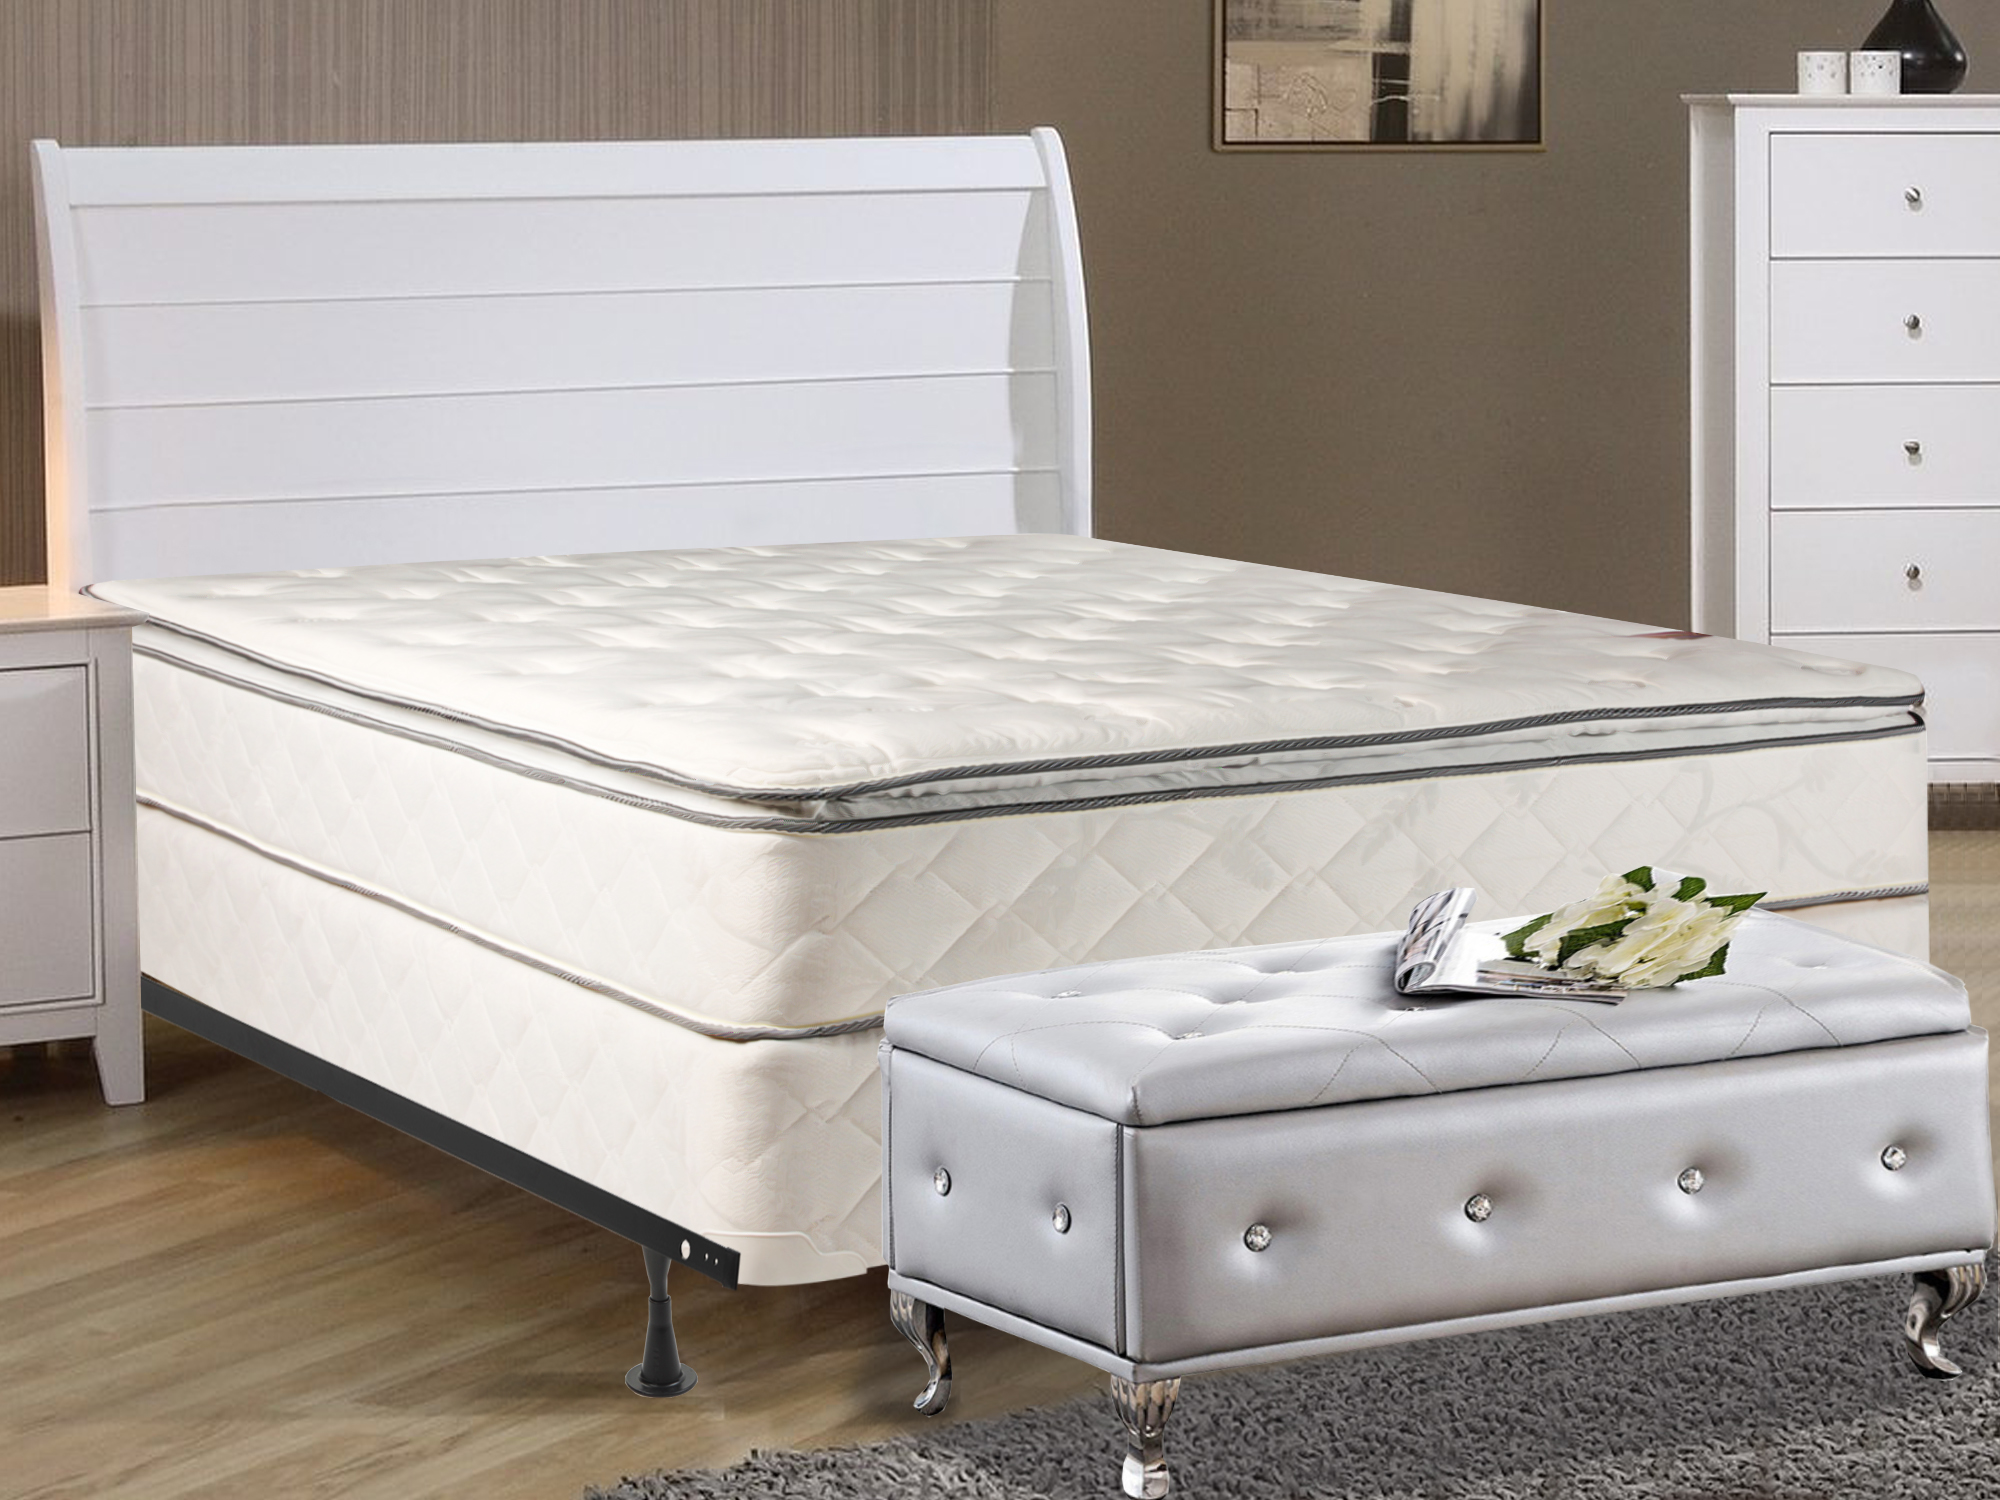 Twin XL Size Continental Sleep No Assembly Required 10-Inch Medium Plush Pillowtop Innerspring Mattress and 4-inch Box Spring//Foundation Set